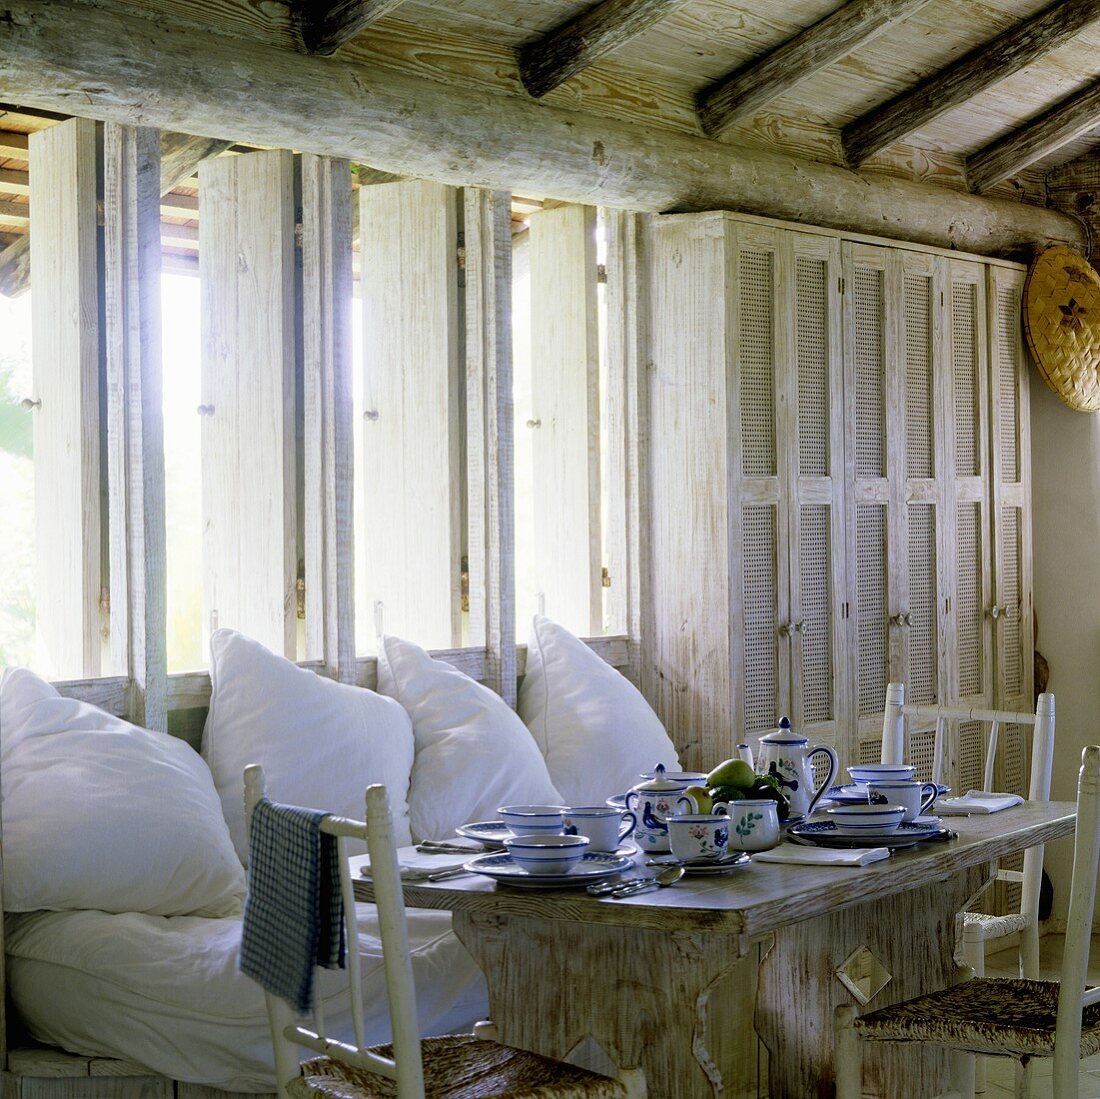 Breakfast in a tropical holiday home with a comfortable bench with white cushions